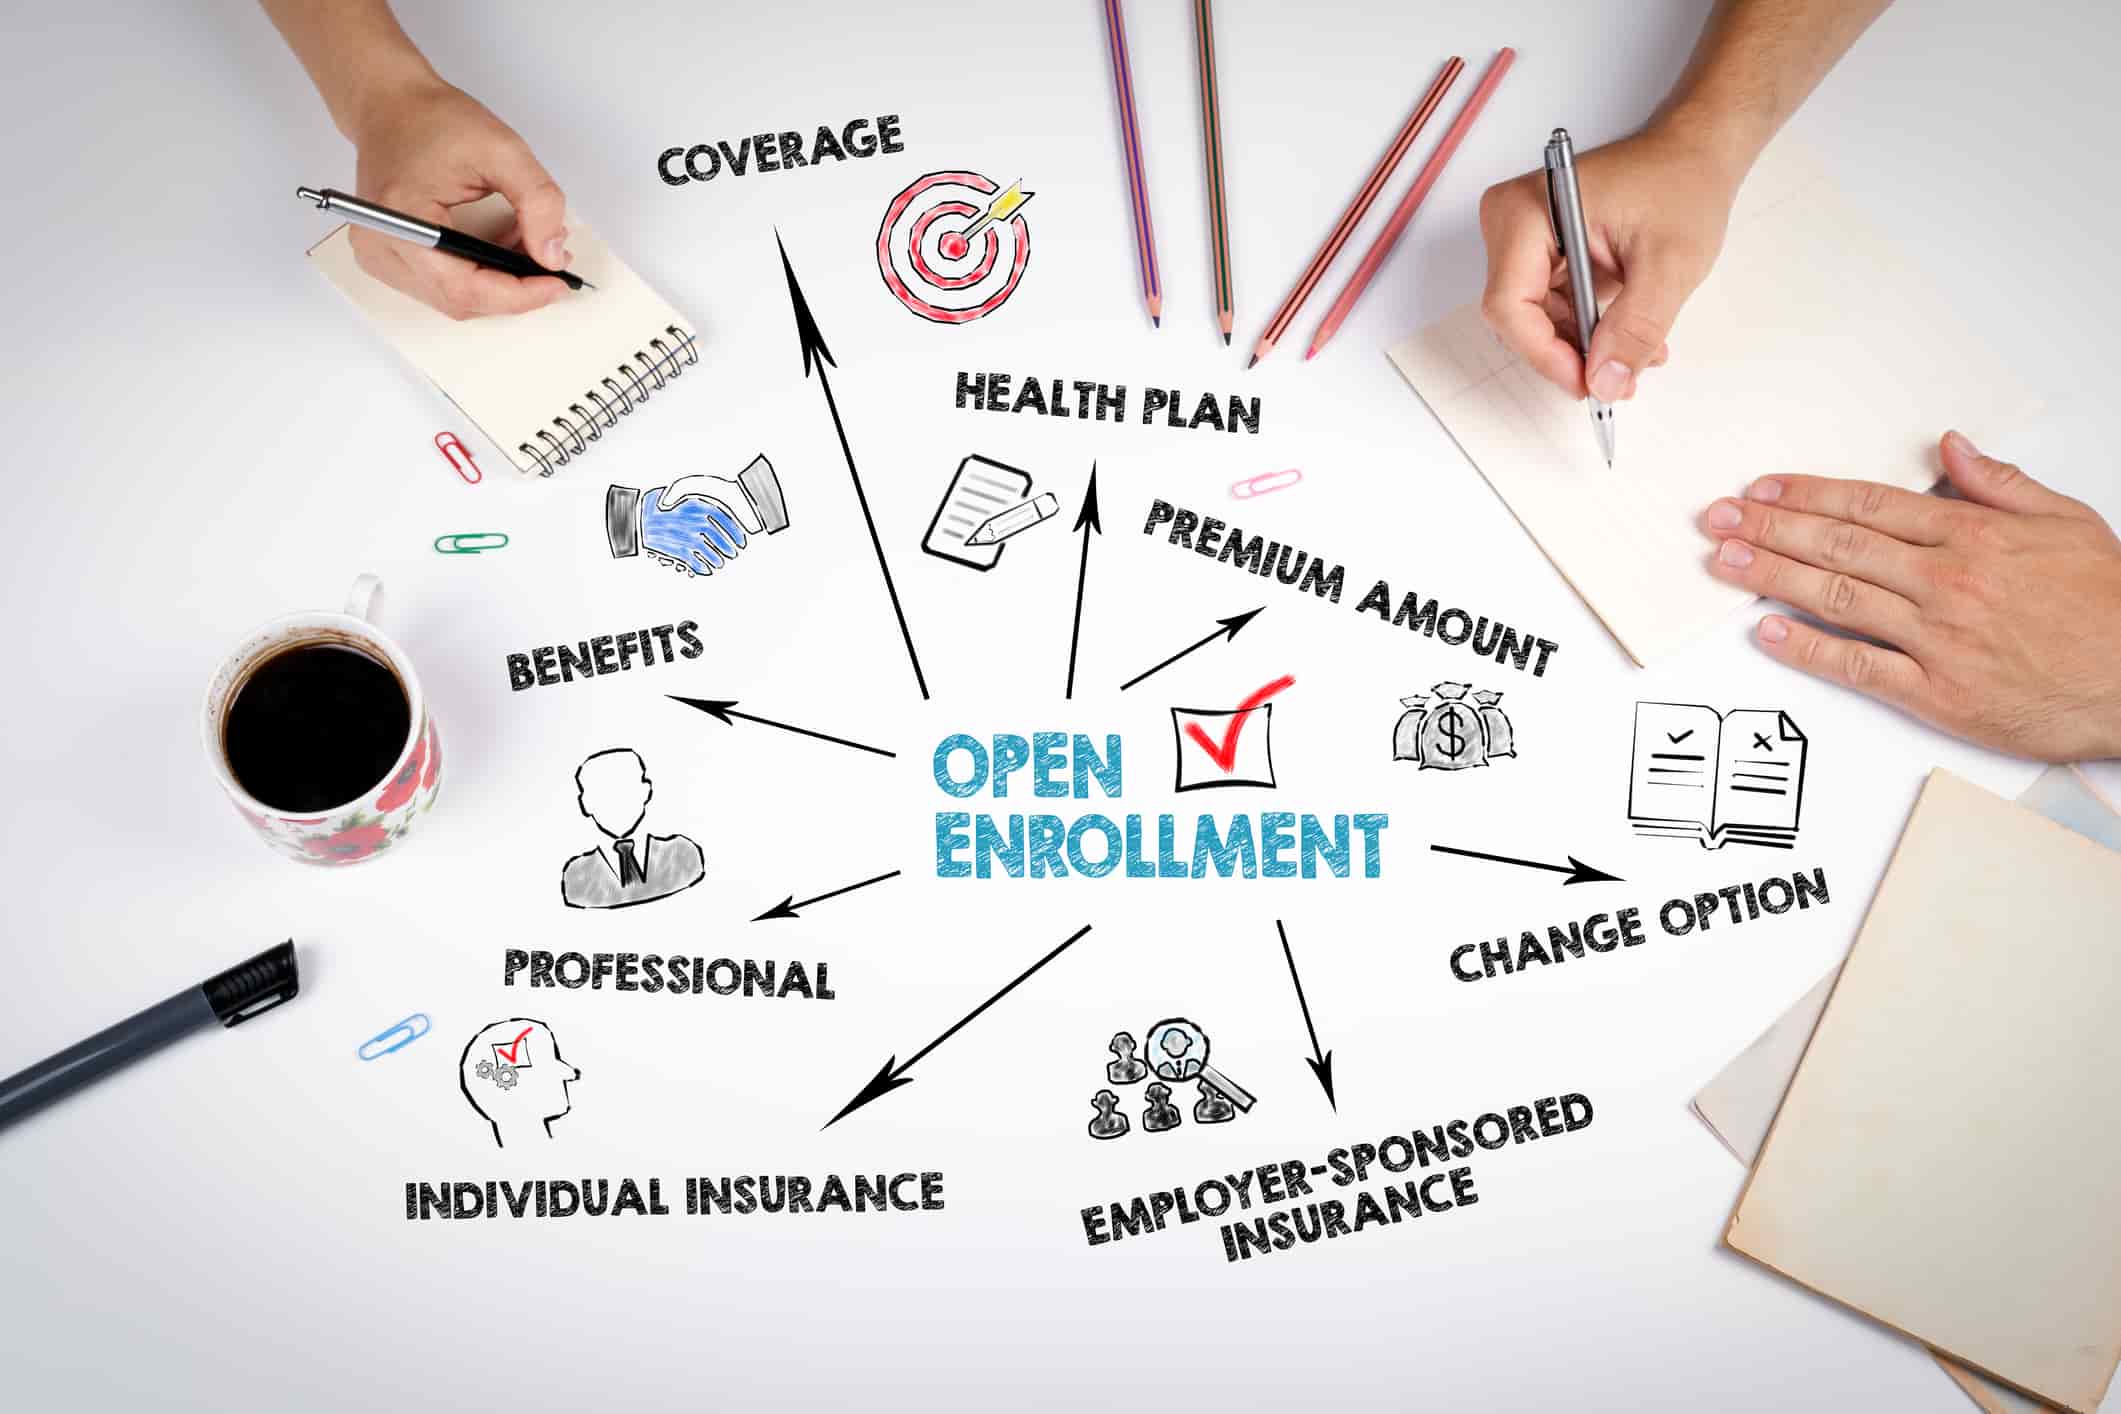 Things to Consider When Preparing for Open Enrollment